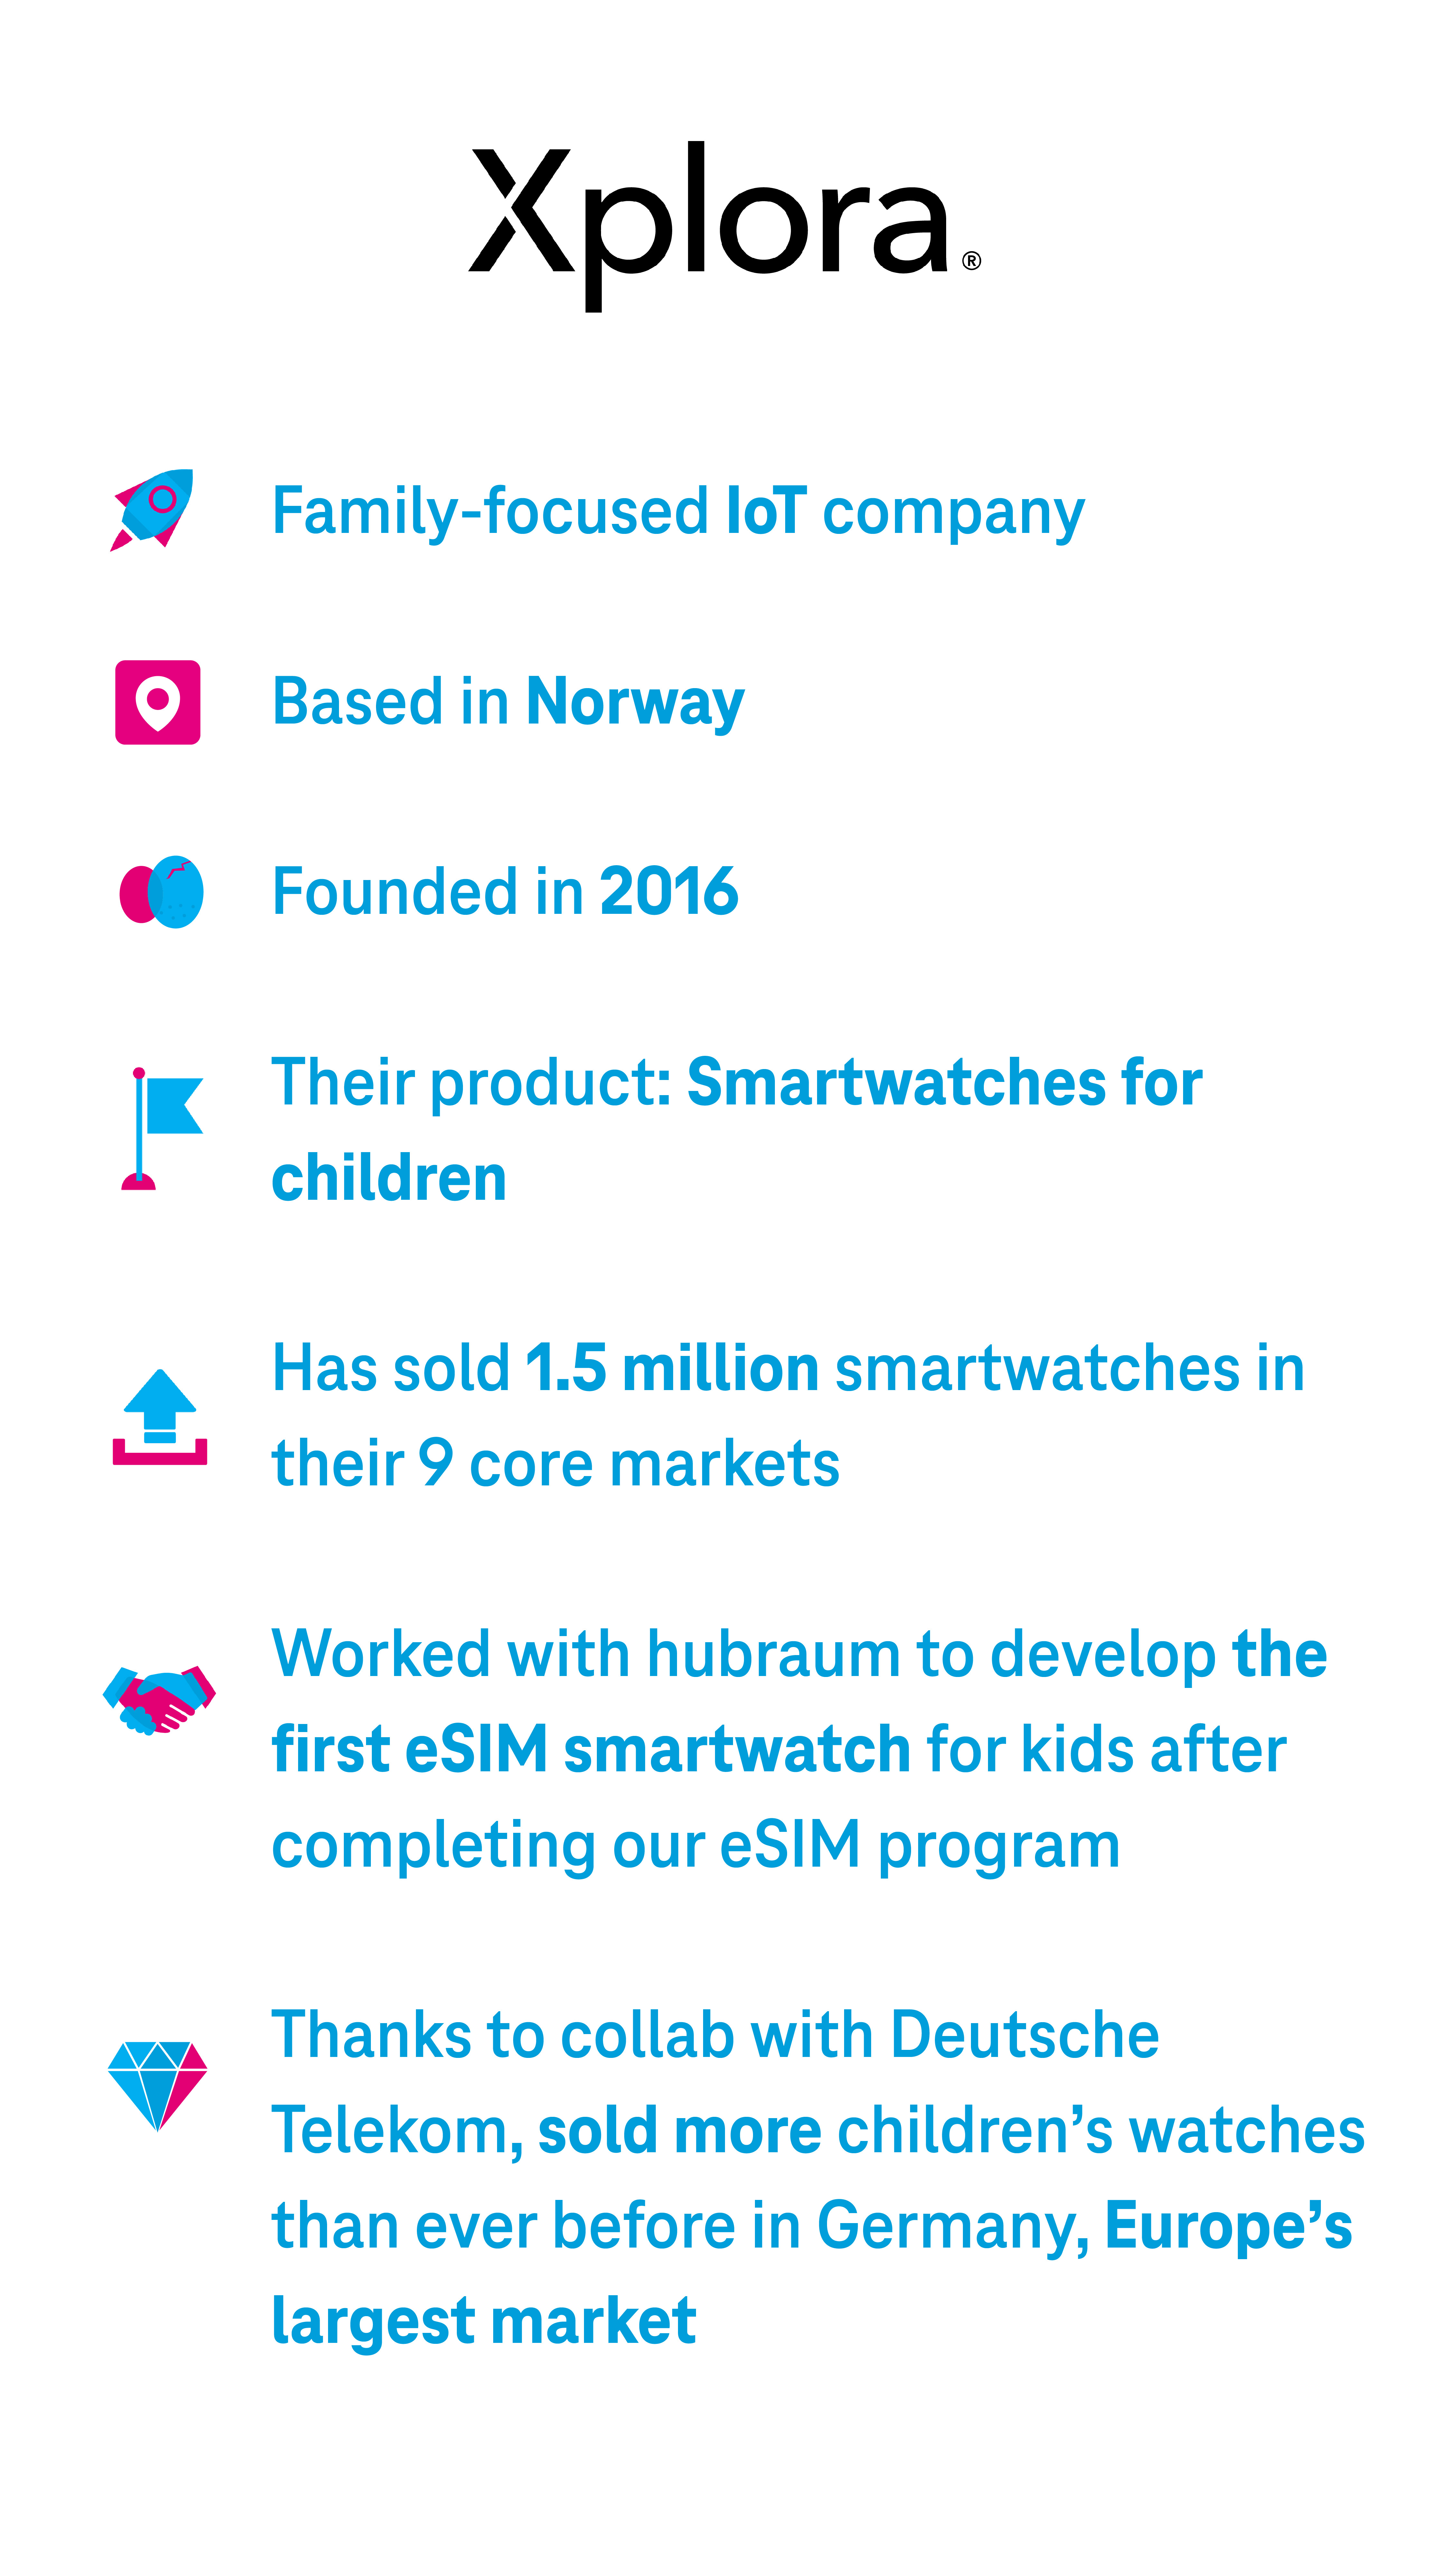 • Family-focused IoT company • Based in Norway • Founded in 2016 • Their product: Smartwatches for children  • Has sold 1.5 million smartwatches in their 9 core markets • Worked with hubraum to develop the first eSIM smartwatch for kids after completing our eSIM program Thanks to collab with Deutsche Telekom, sold more children’s watches than ever before in Germany, Europe’s largest market